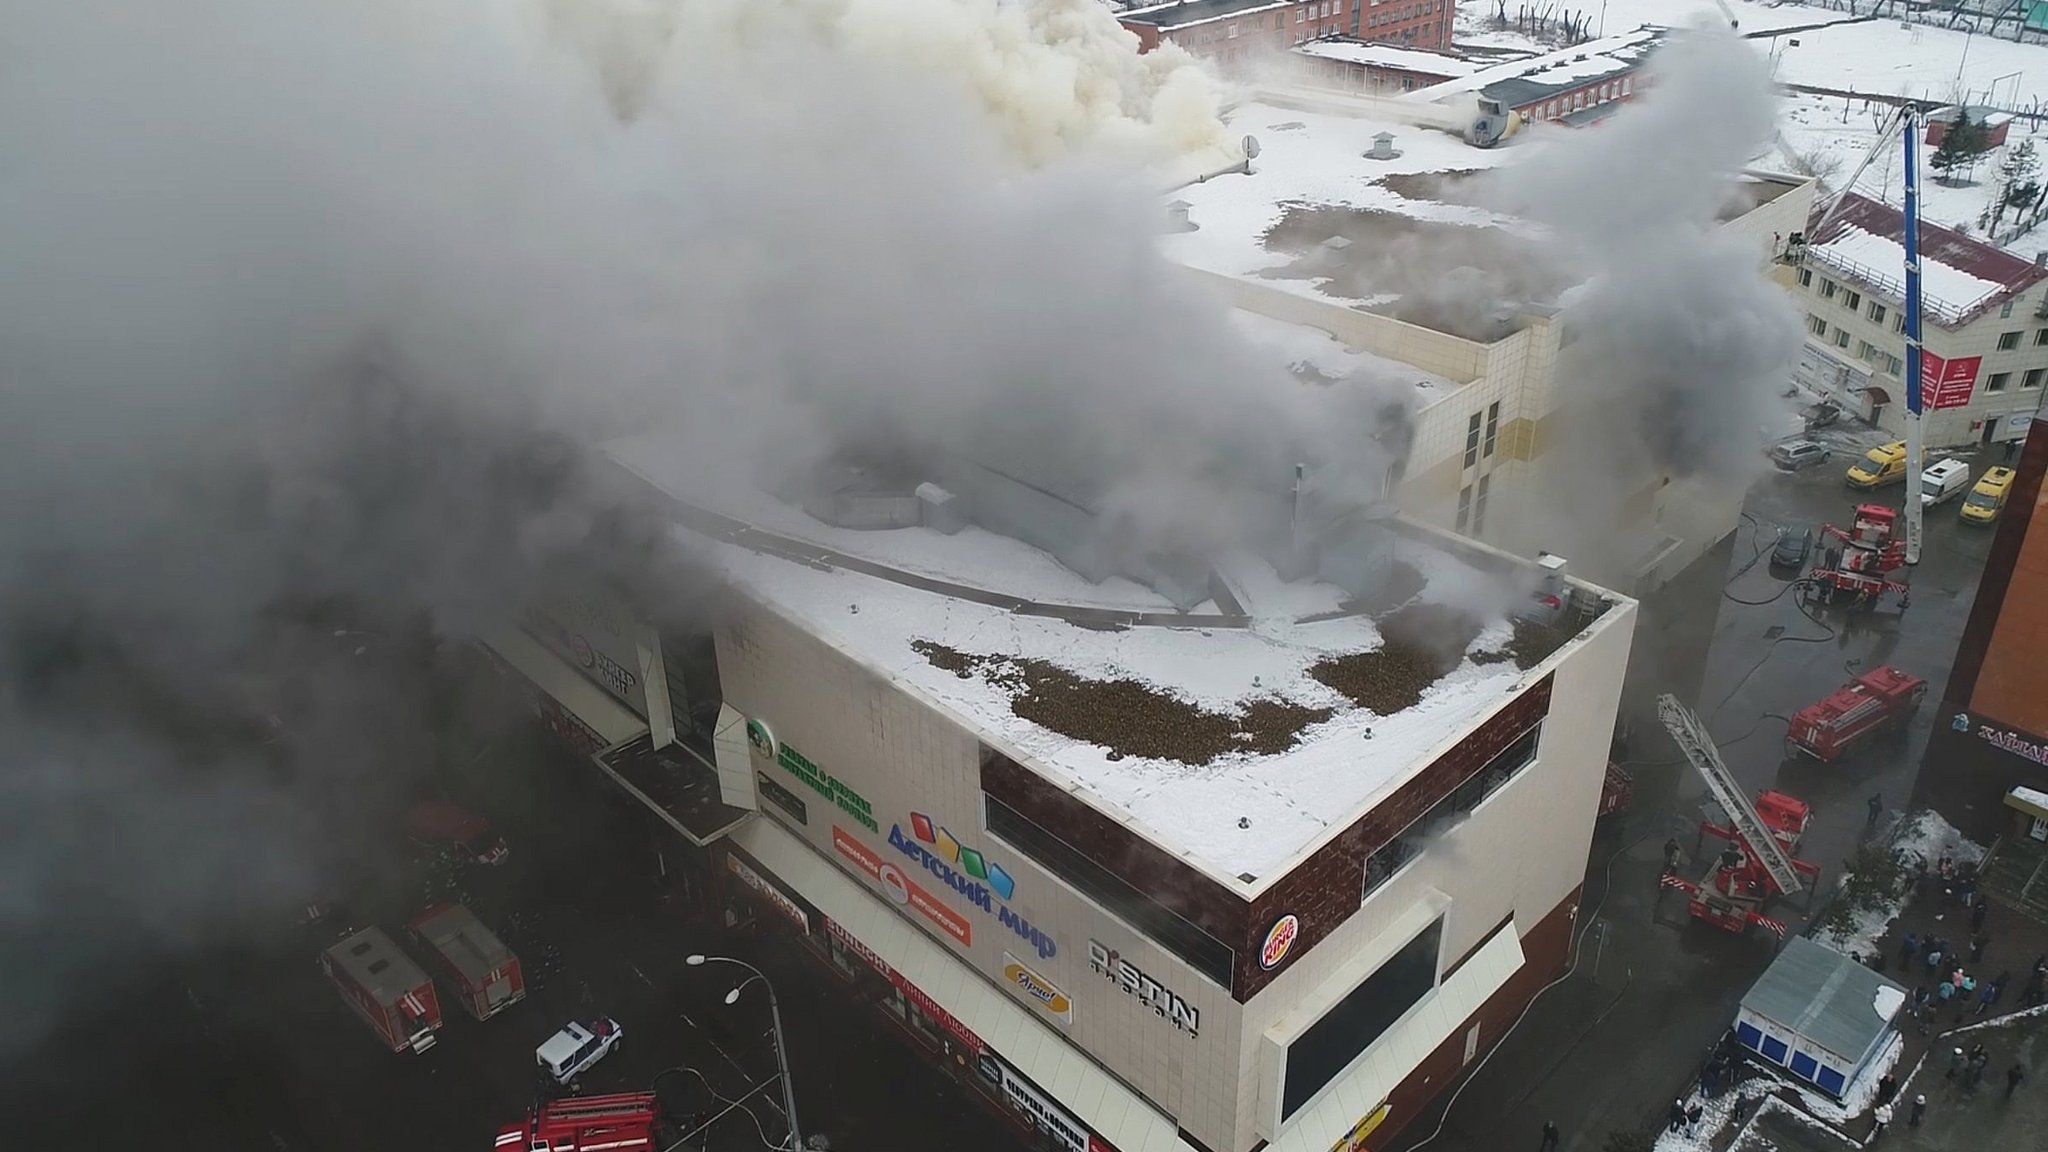 Video provided by Russian Emergencies Ministry shows a fire at a shopping mall in Kemerovo, Russia March 25, 2018